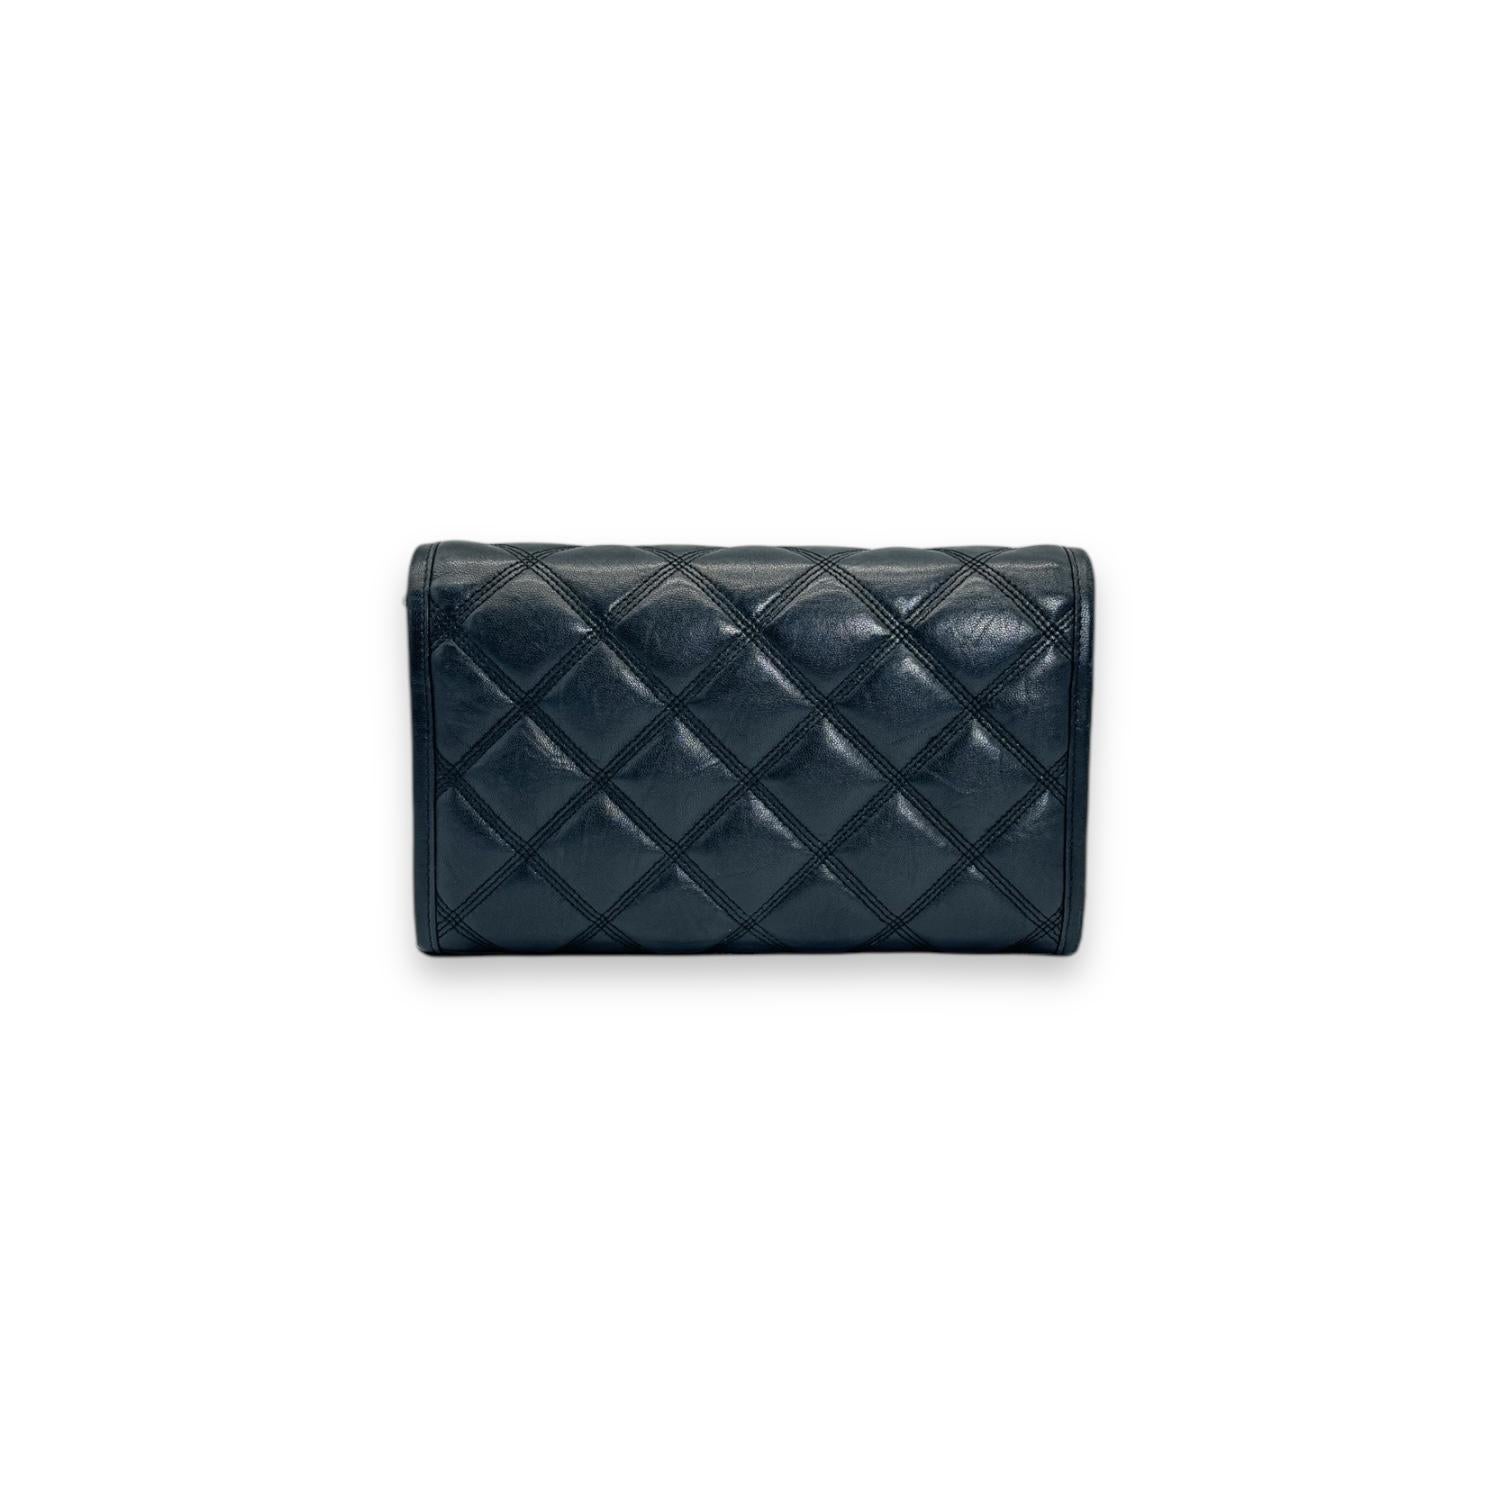 YSL Saint Laurent Becky Quilted Black Leather Wallet on Chain In Good Condition For Sale In Scottsdale, AZ